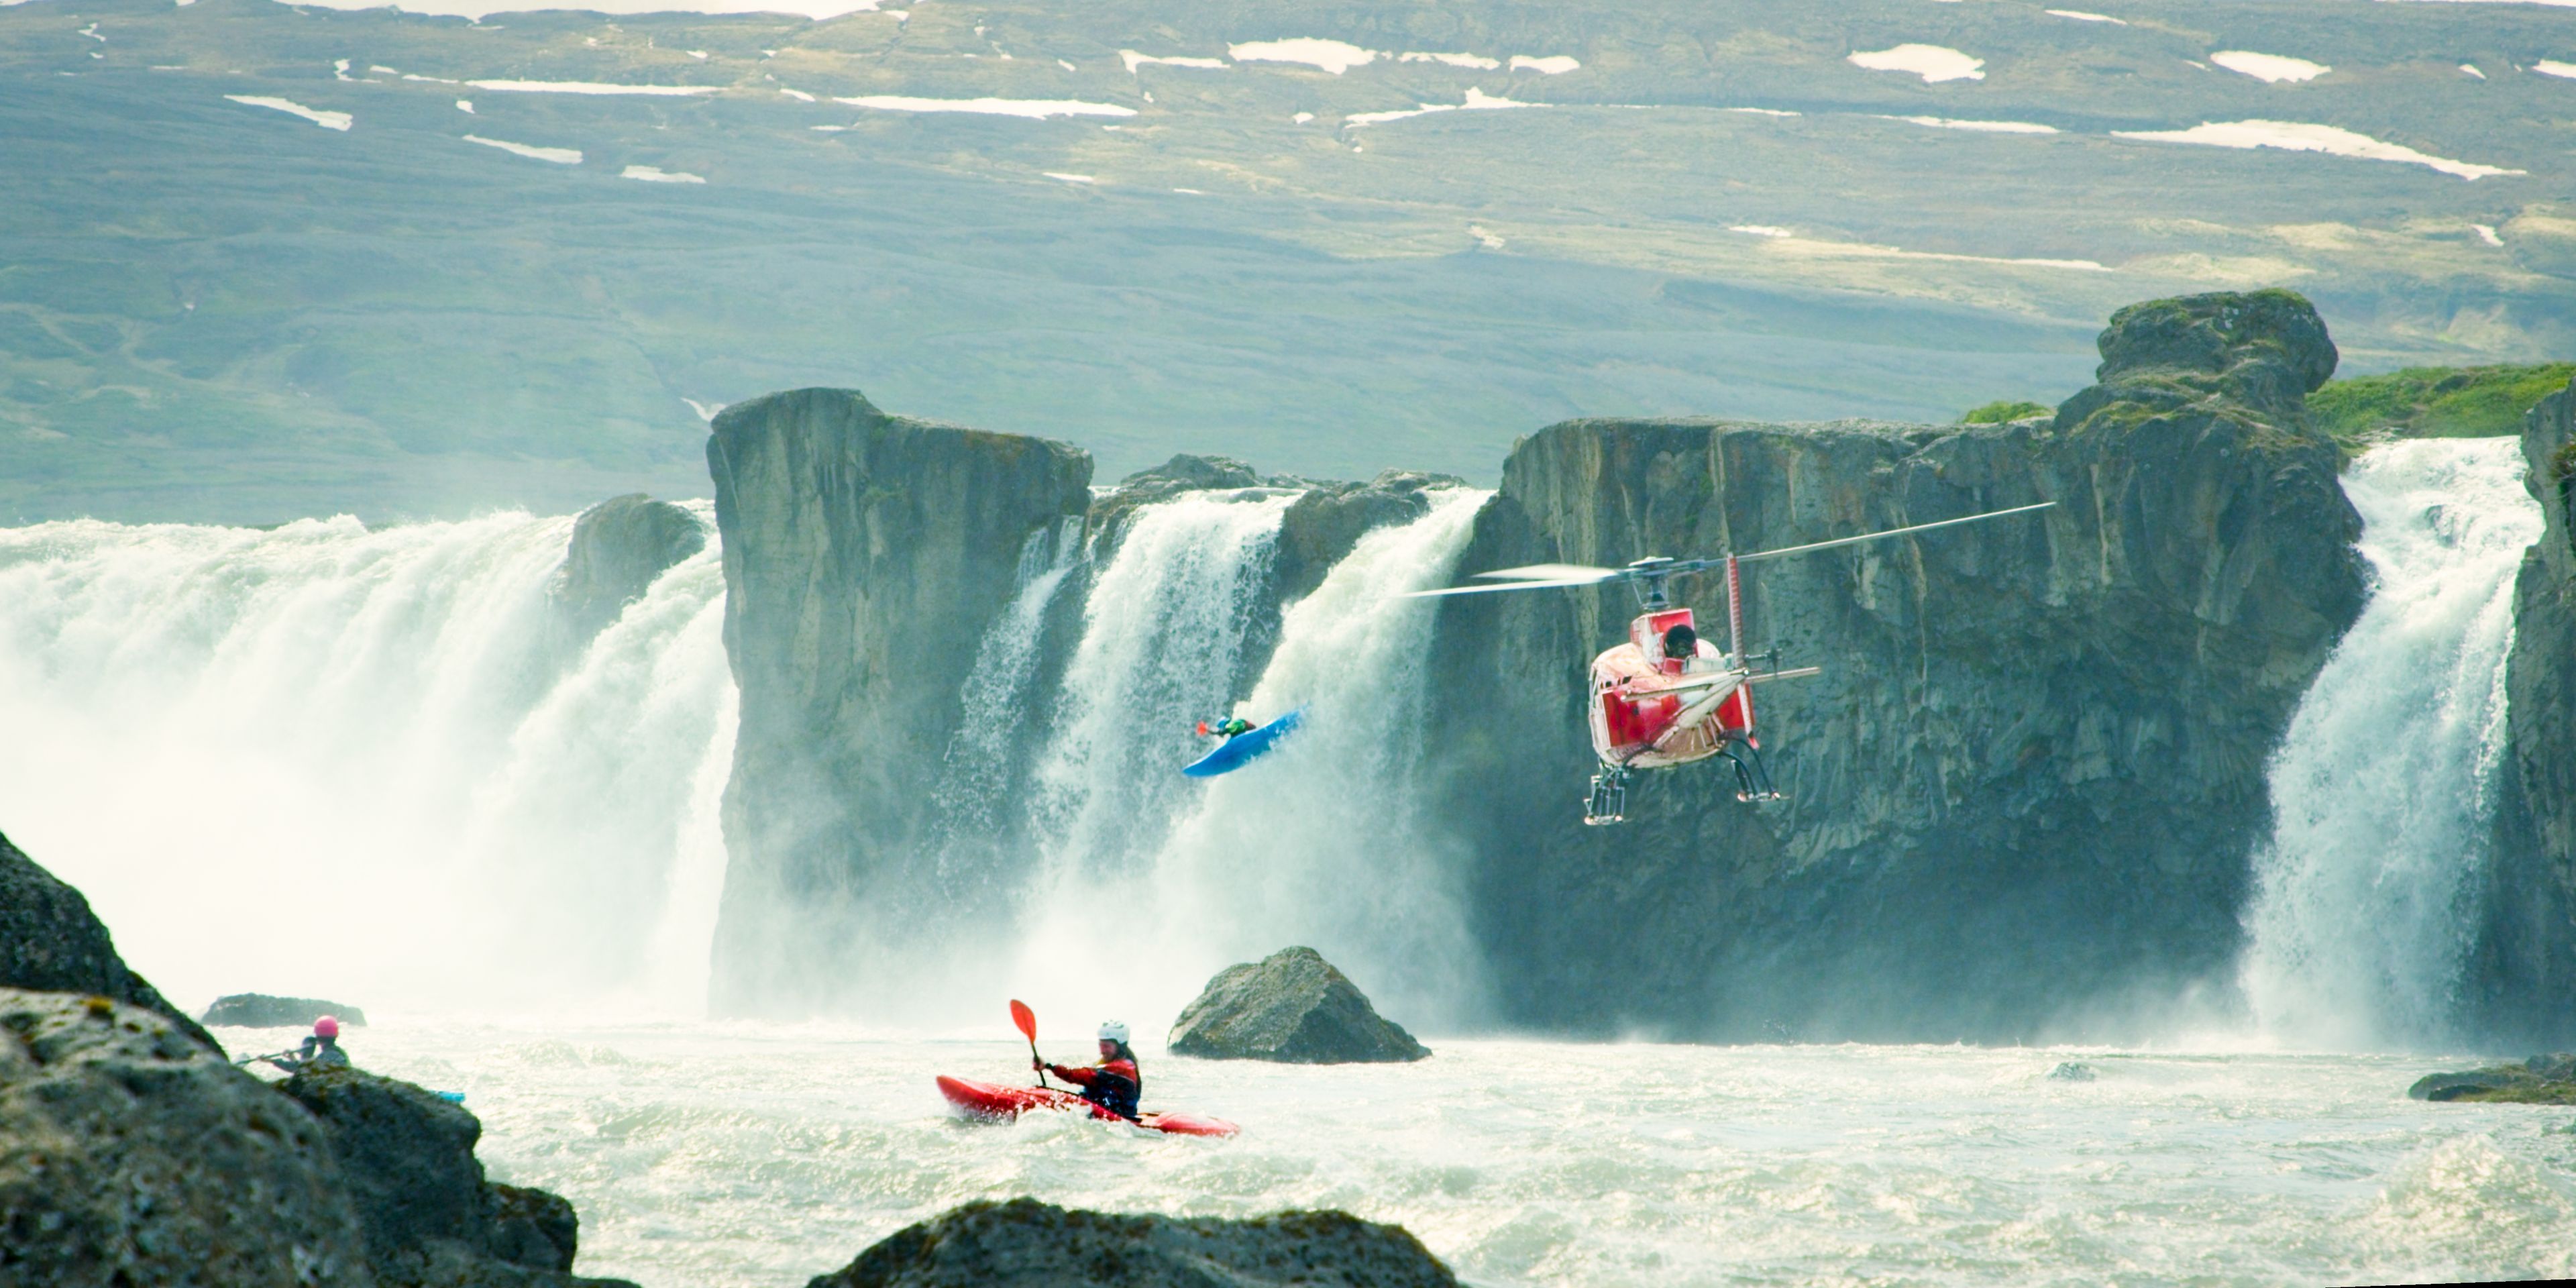 Kayaking scene with helicopter during a flyover iceland movie making